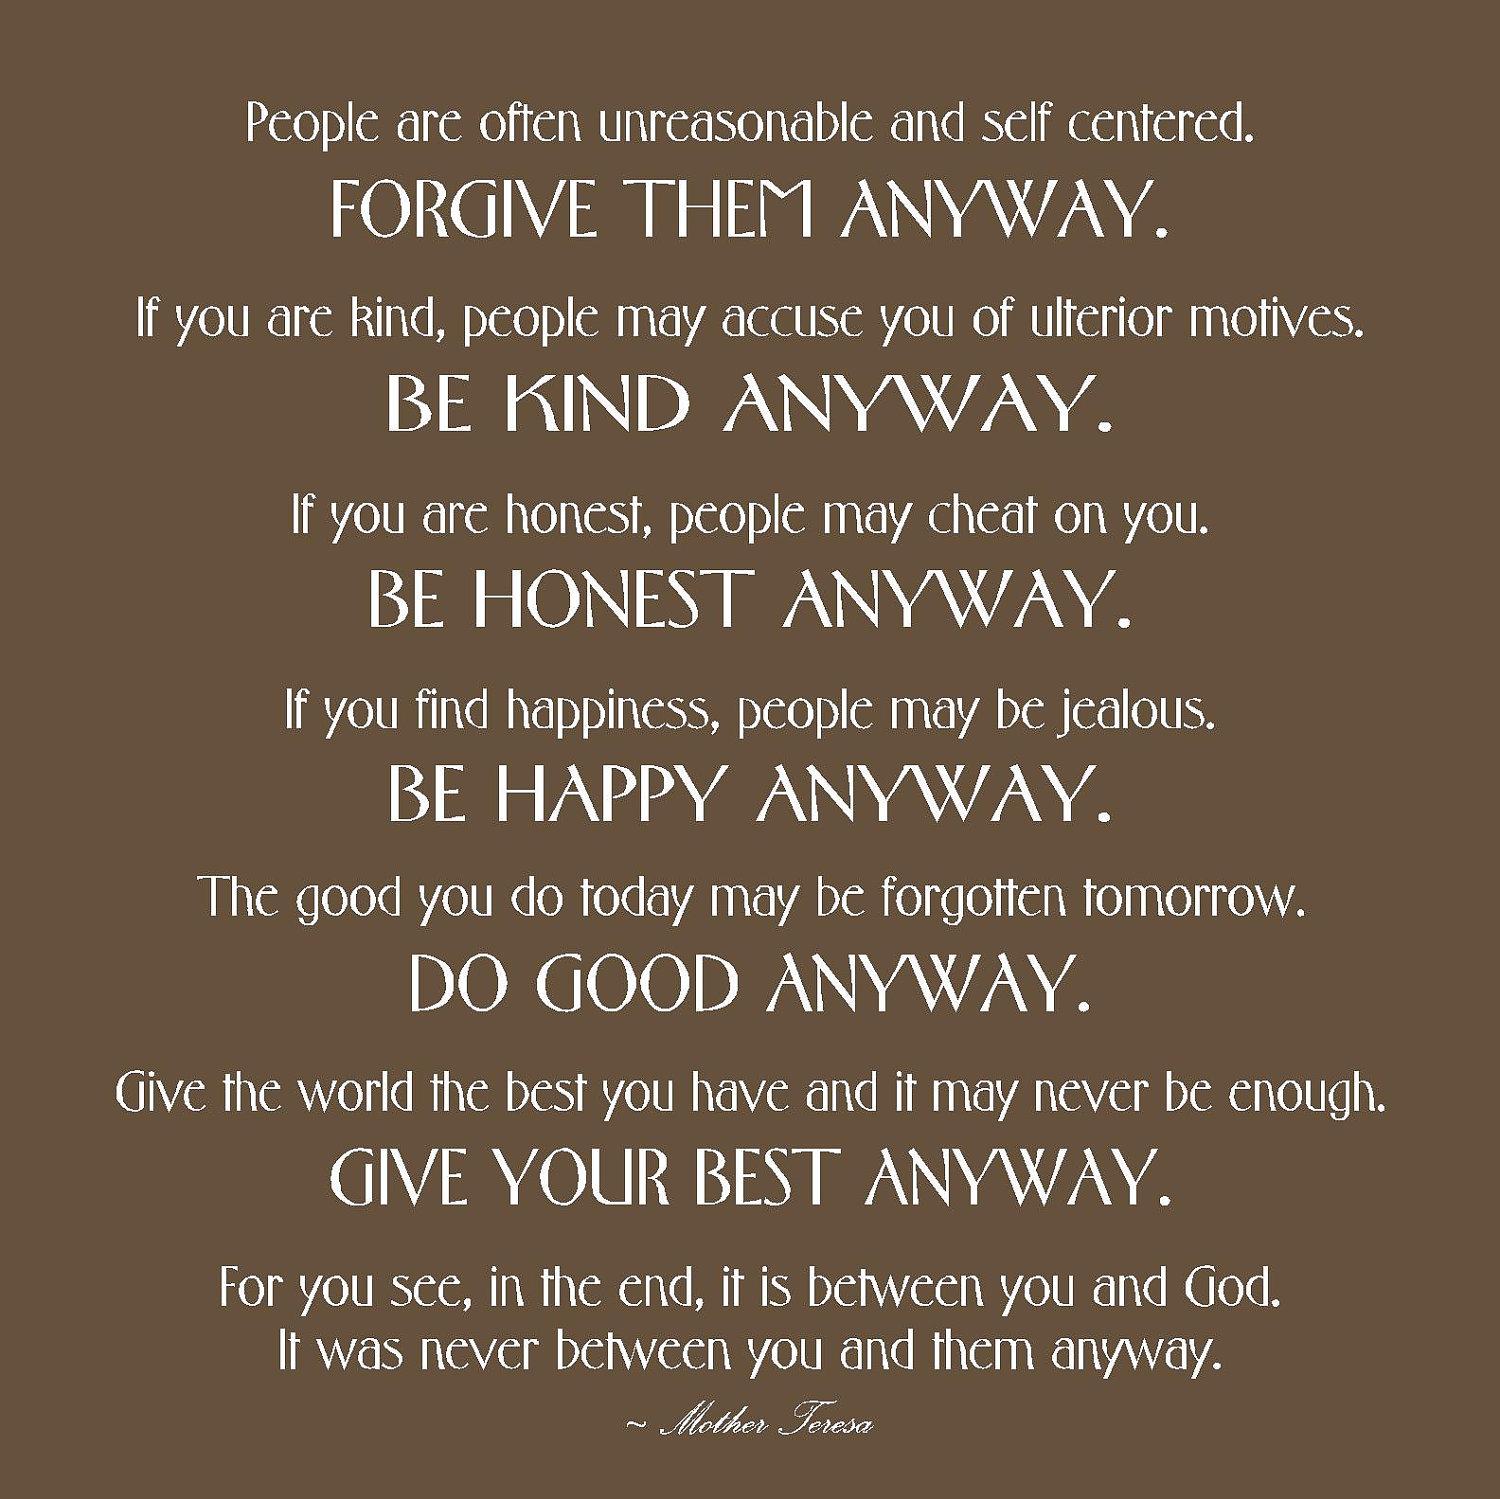 Lessons in Life by Mother Teresa scatteredimpressions